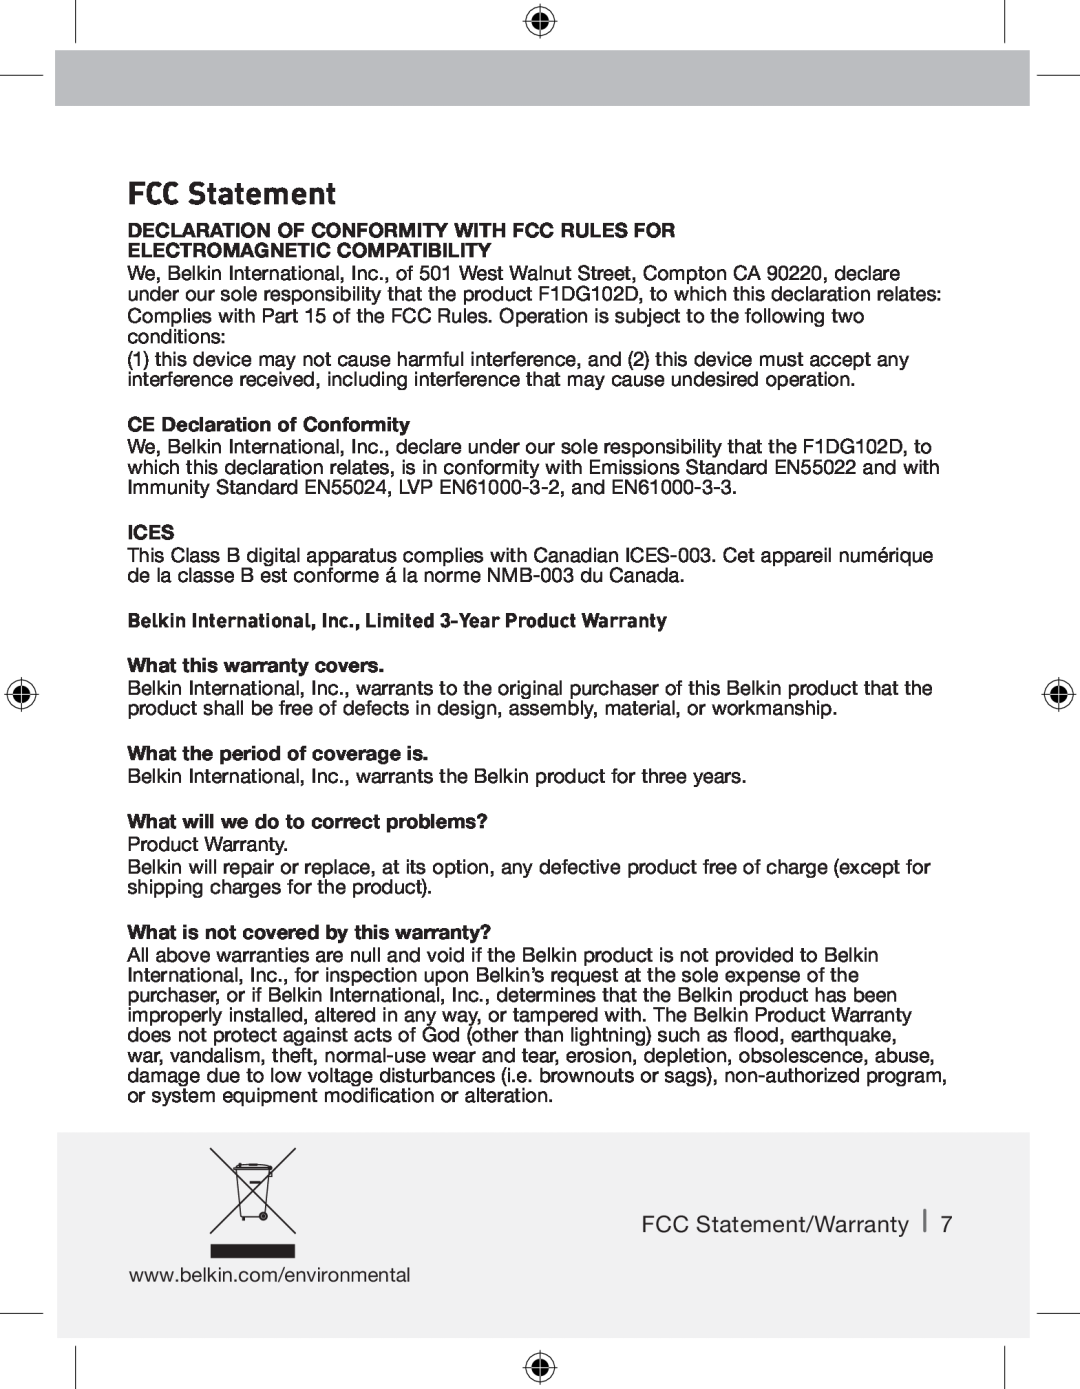 Belkin F1DG 102Duk FCC Statement/Warranty, Declaration Of Conformity With Fcc Rules For, Electromagnetic Compatibility 